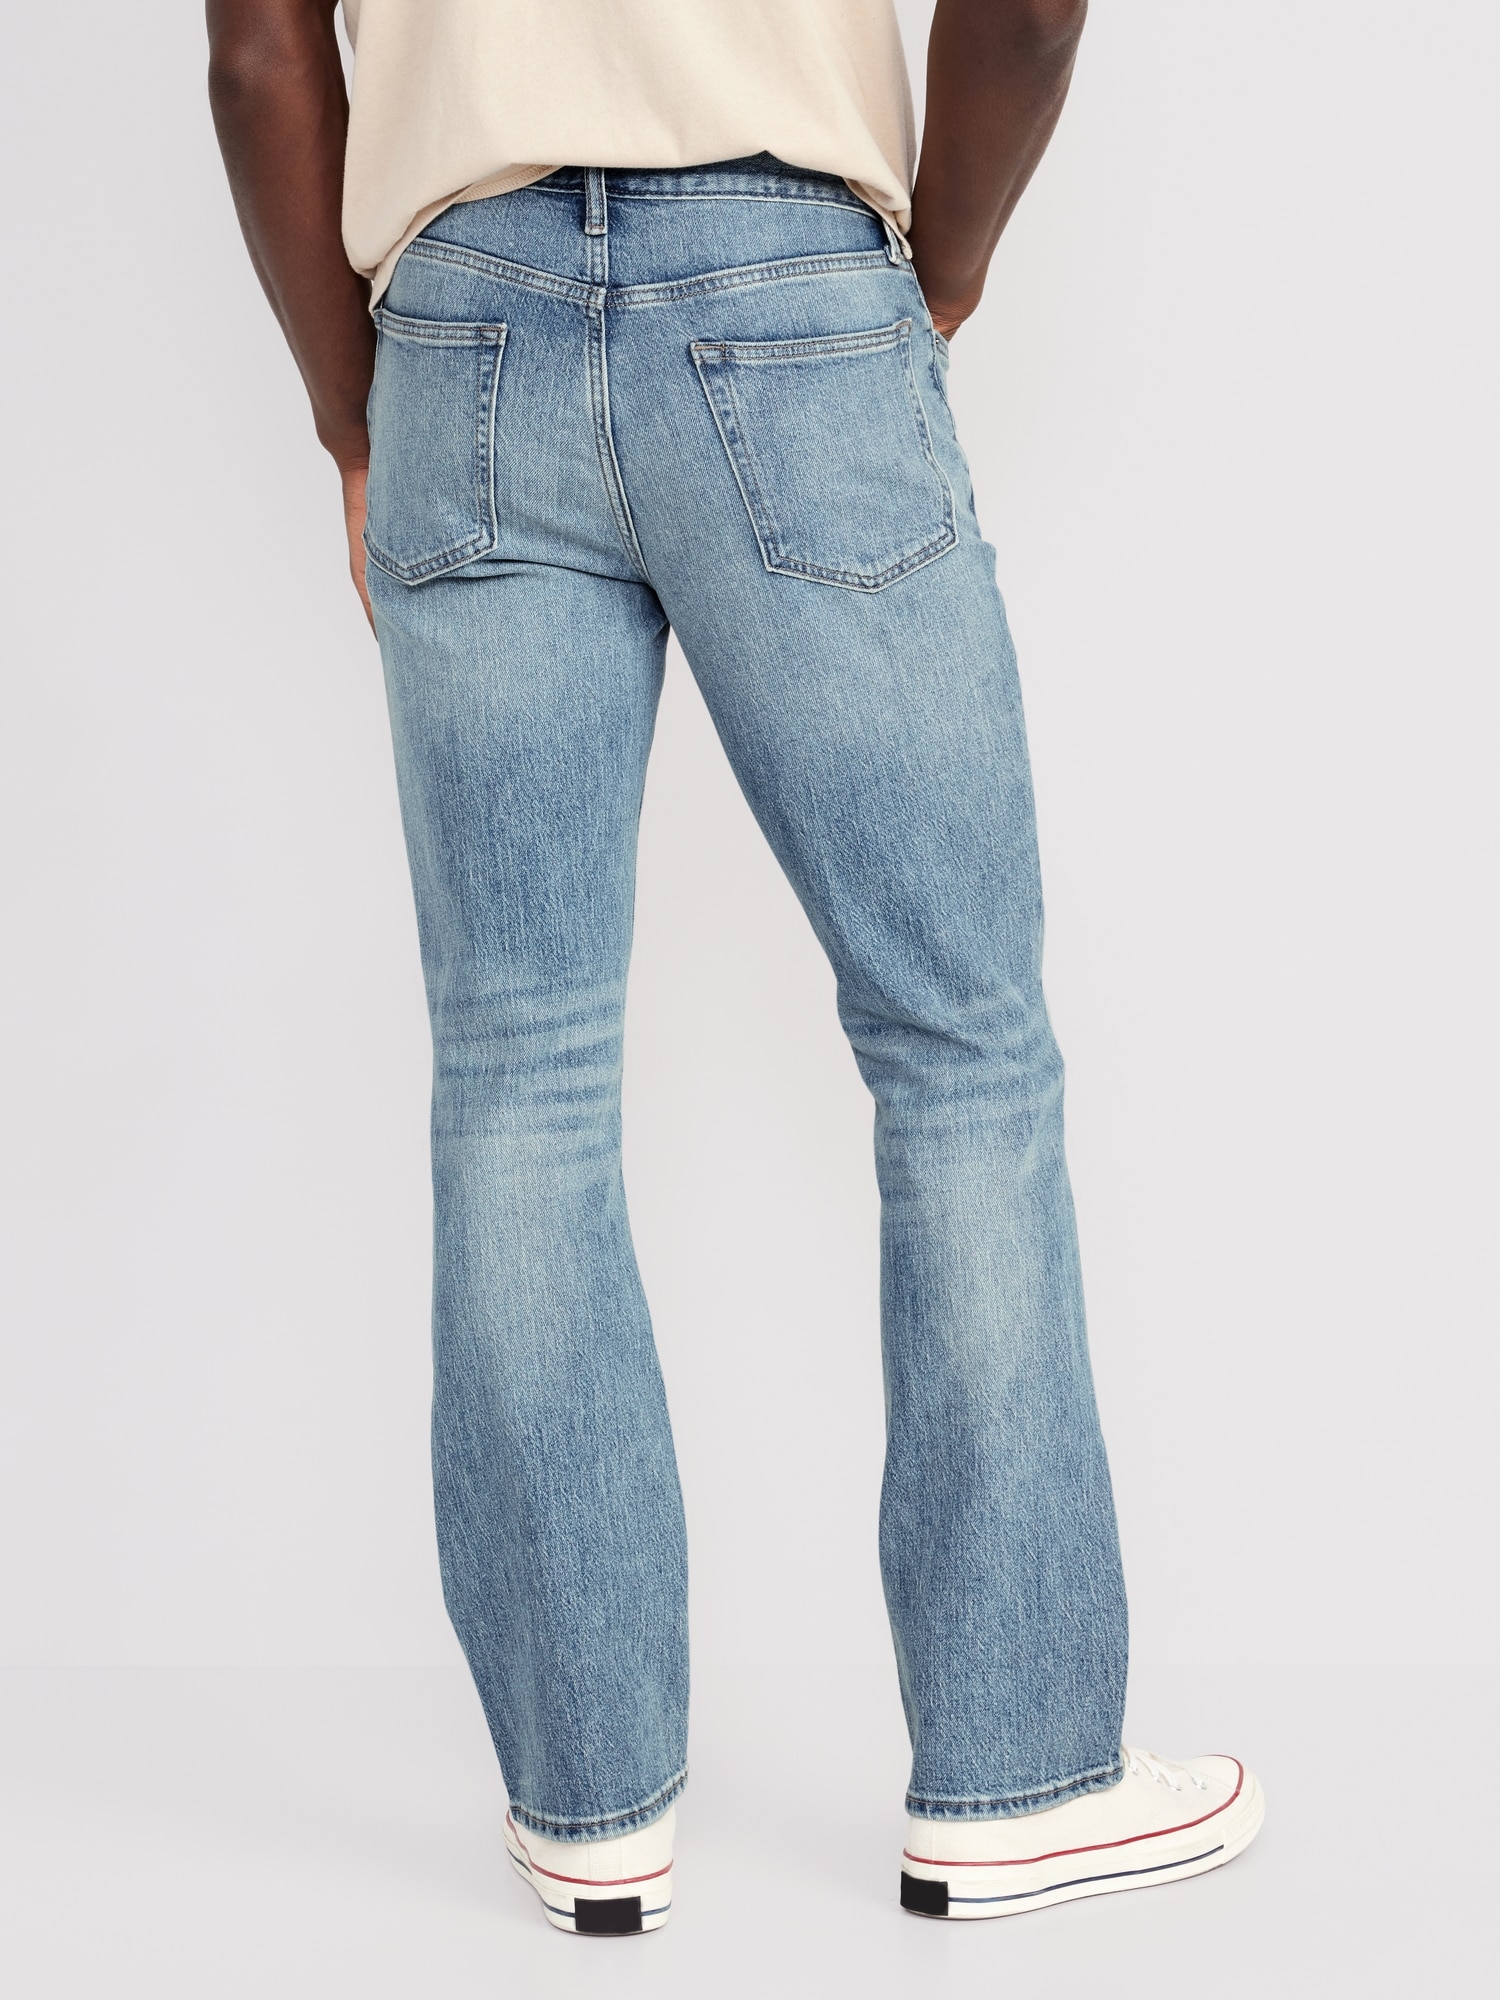 Boot-Cut Built-In Flex Jeans | Old Navy